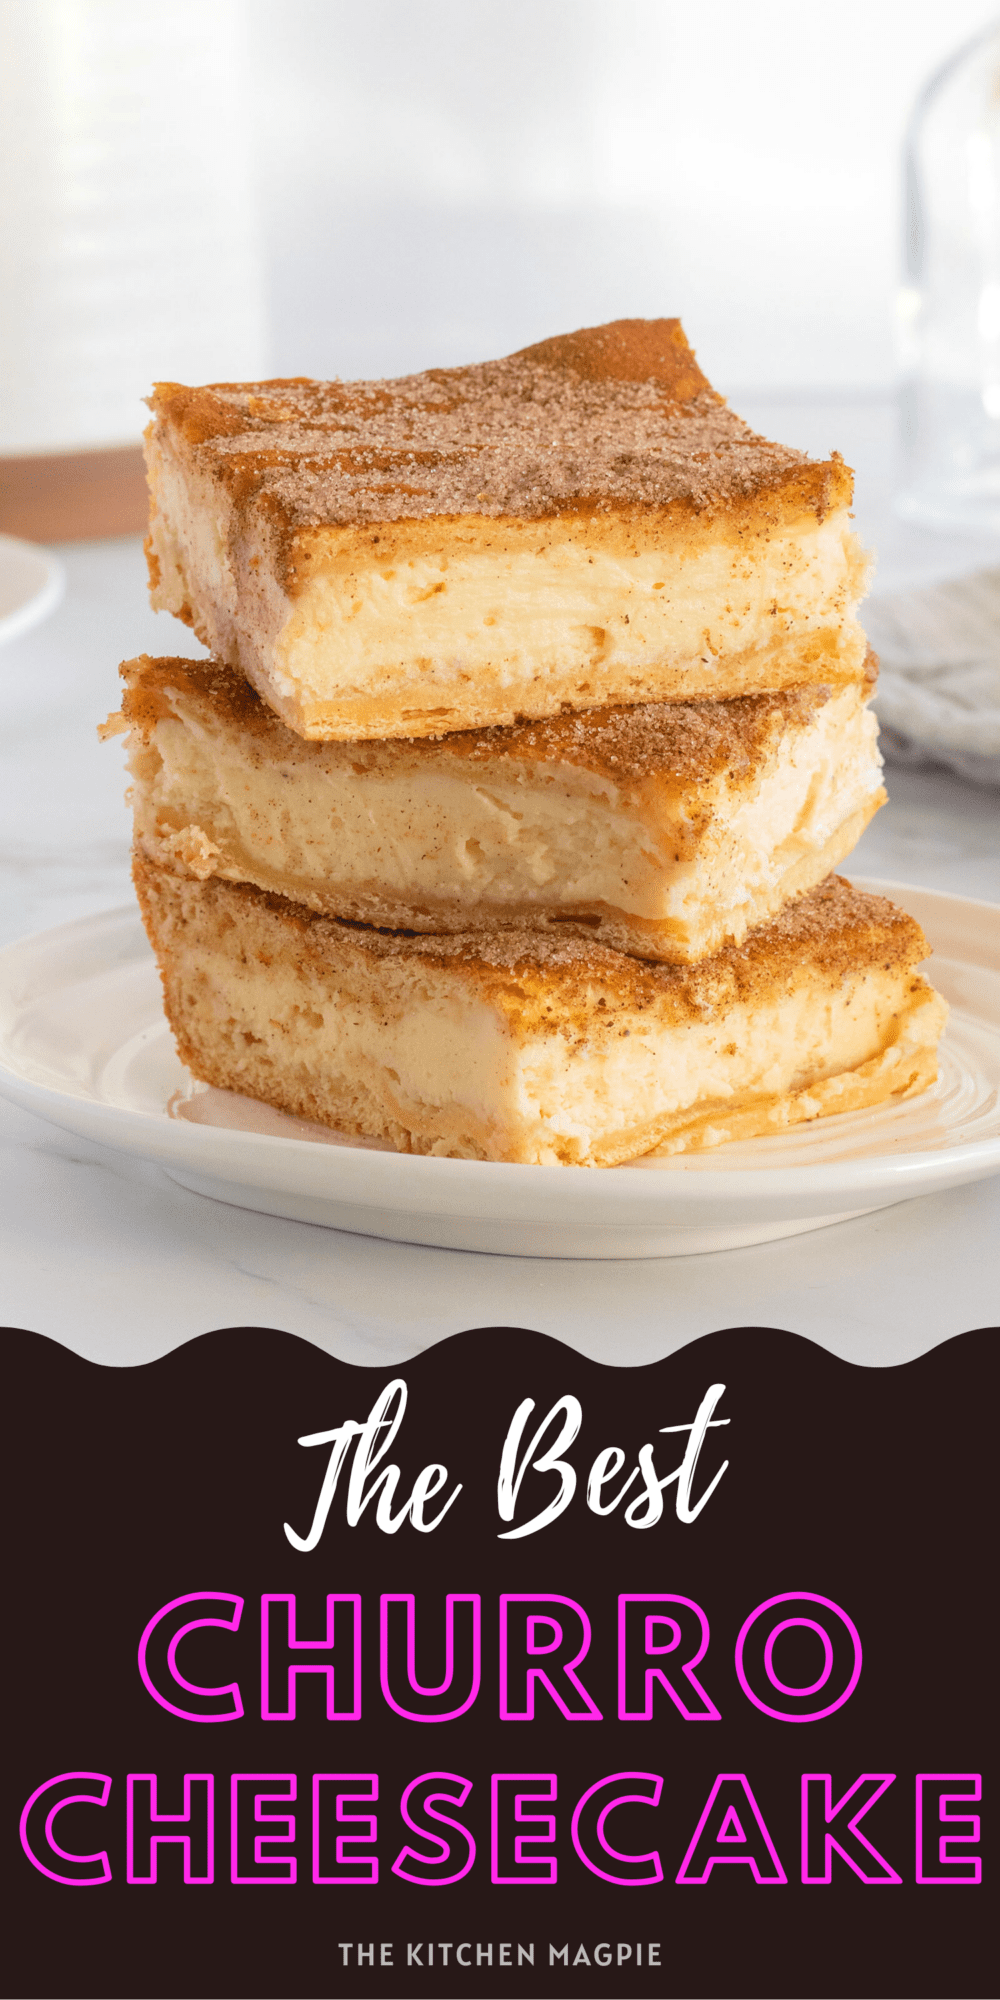 Fast and easy churro cheesecake using canned dinner rolls! This cinnamon and cream cheese dessert is one that is sure to impress!